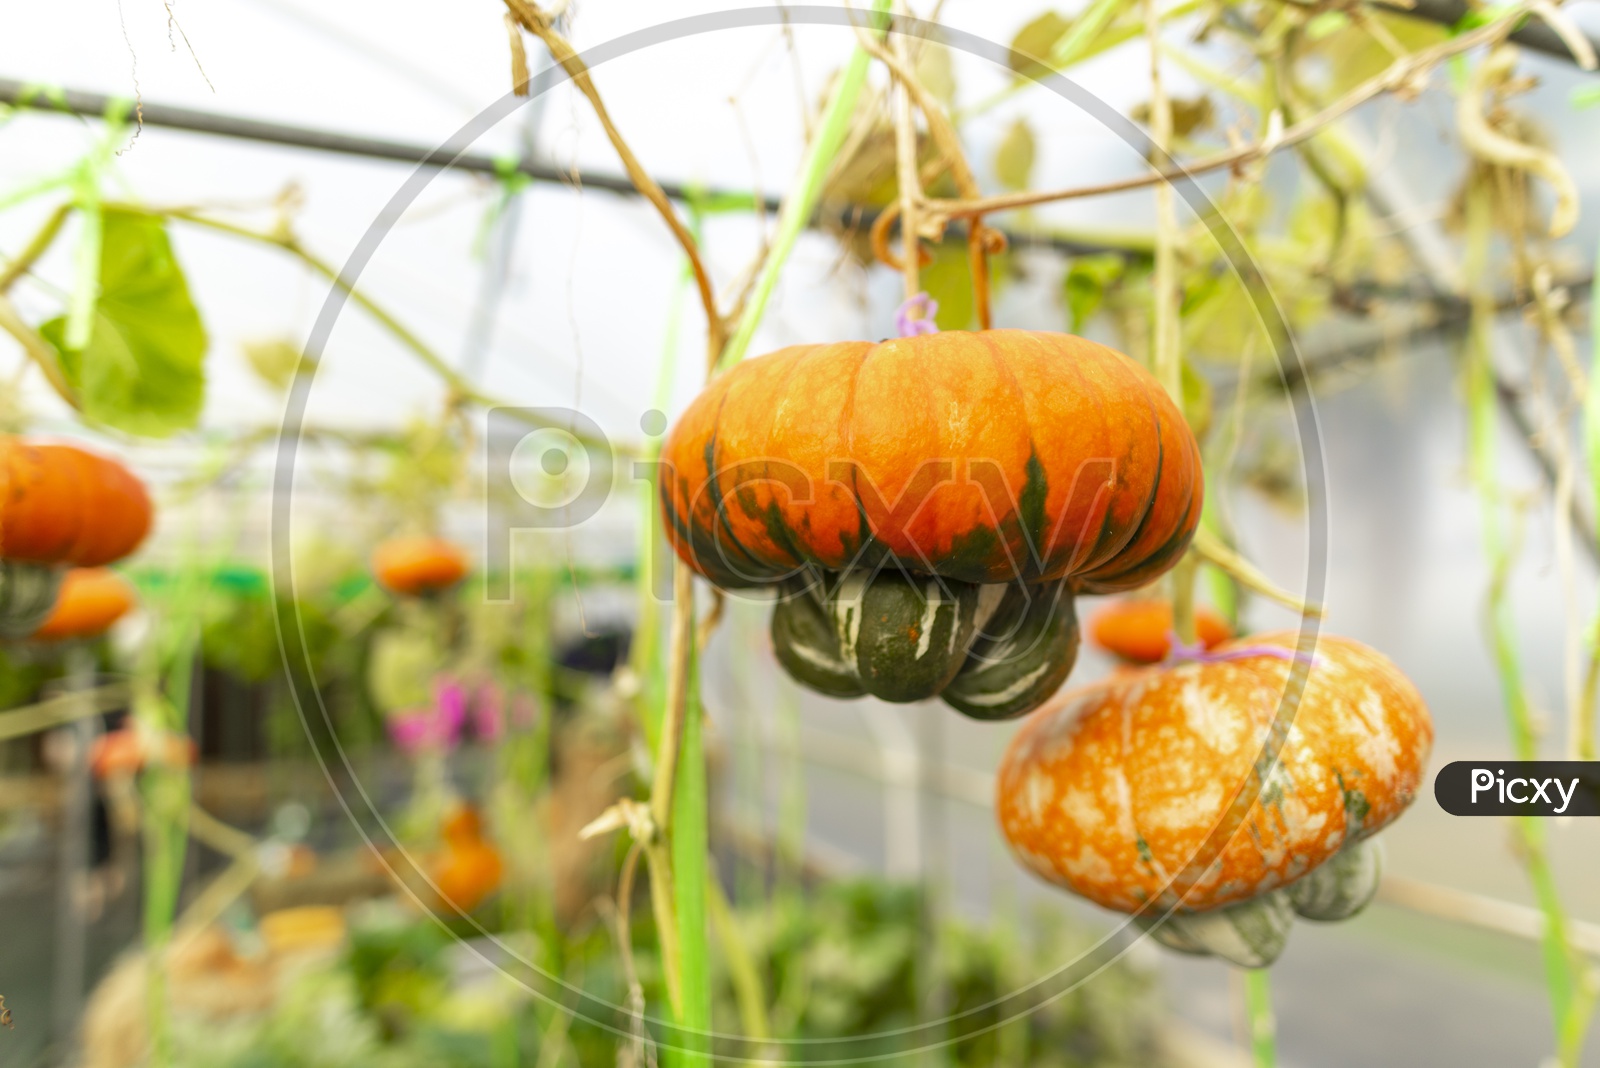 fantasy pumpkin Cultivation By Modern Agricultural technique In Green Houses